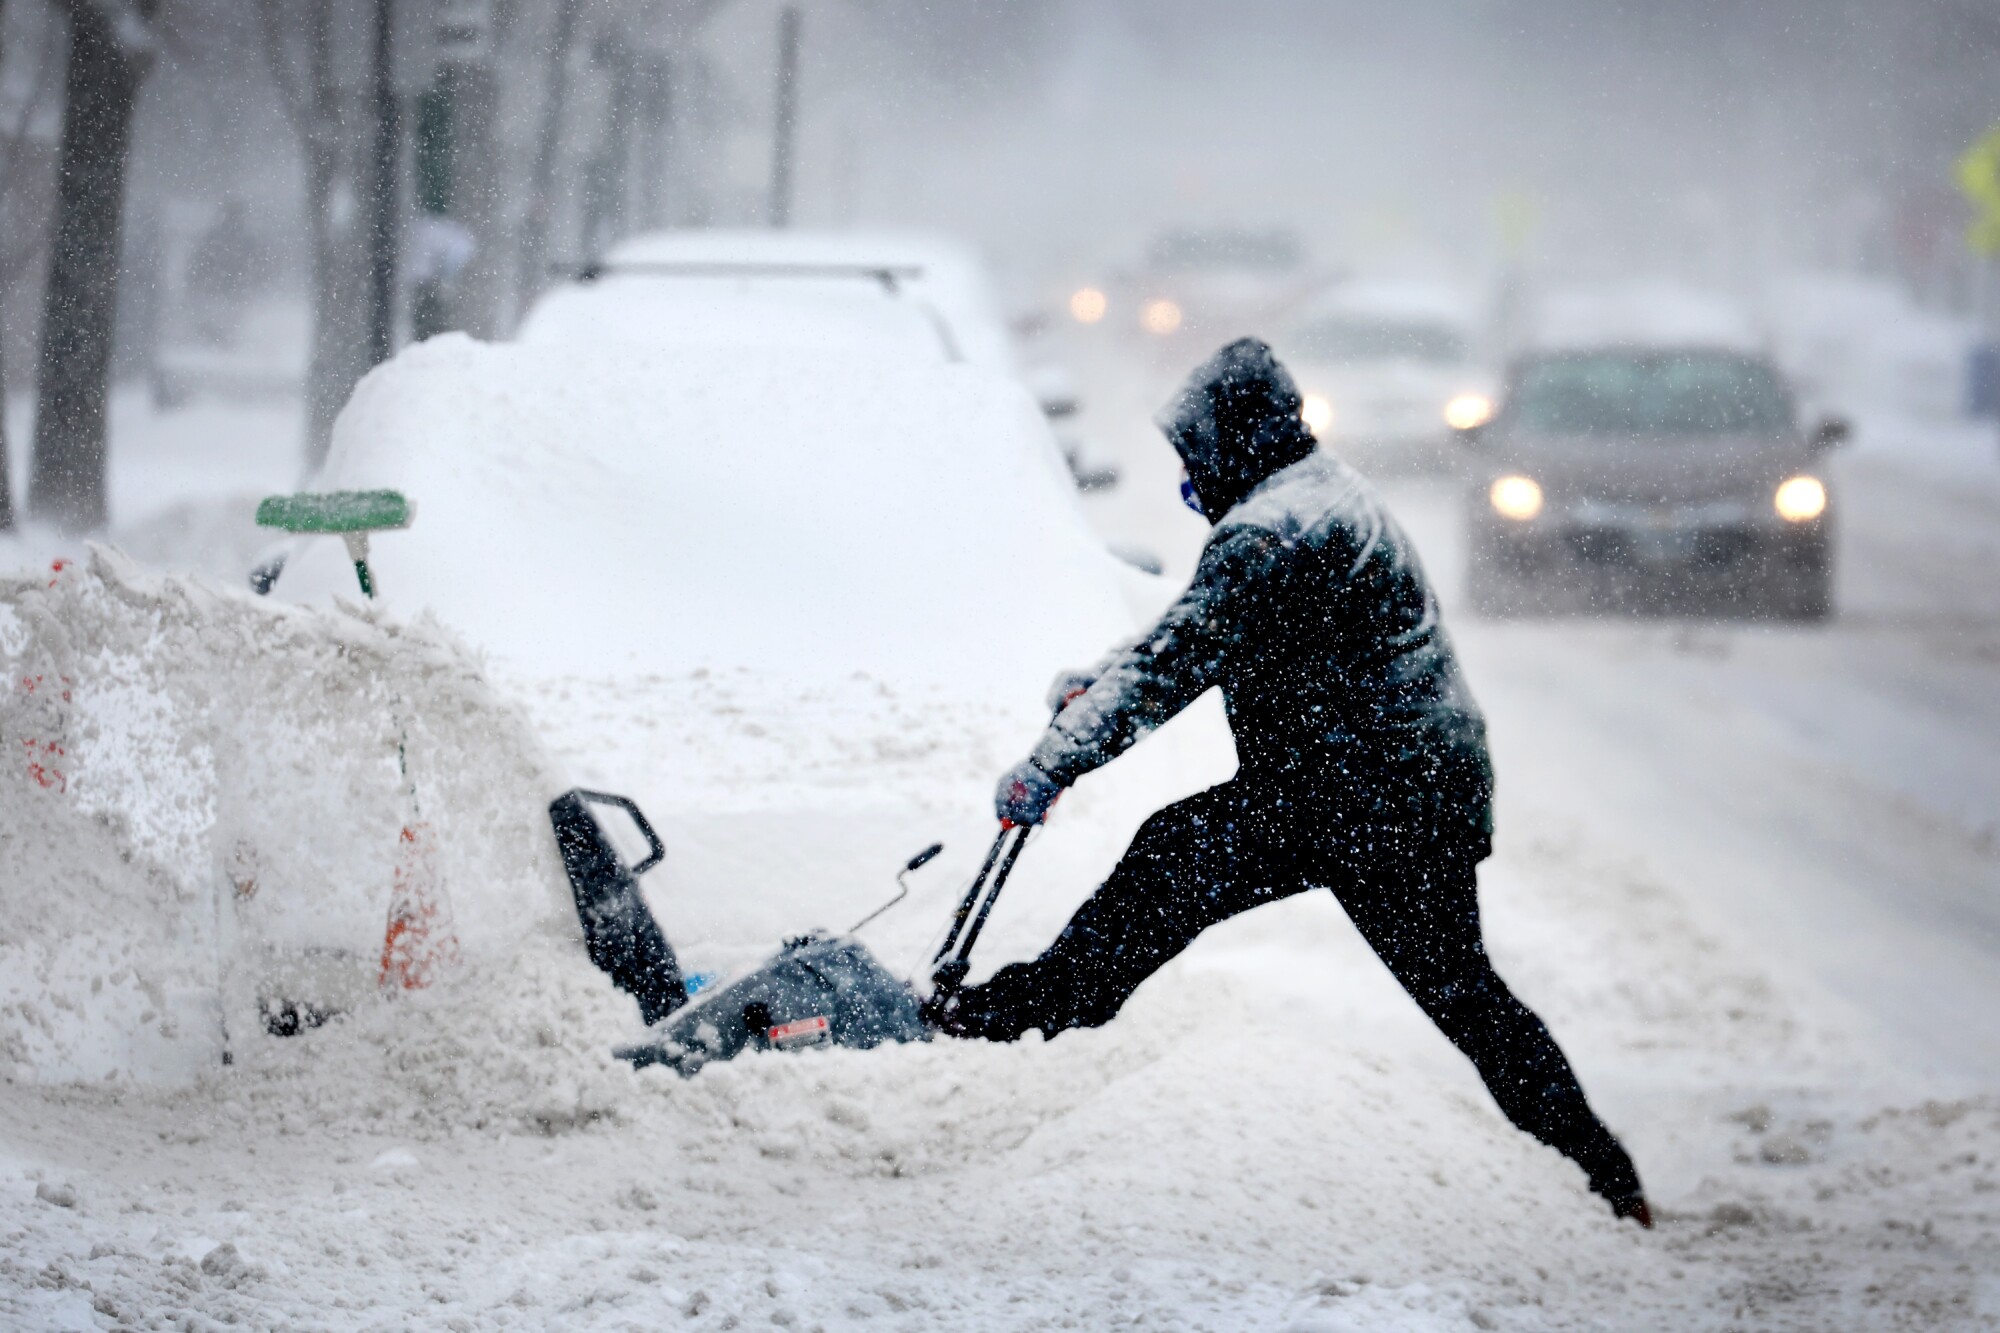 A resident digs out his car on February 02, 2022 in Chicago, Illinois.